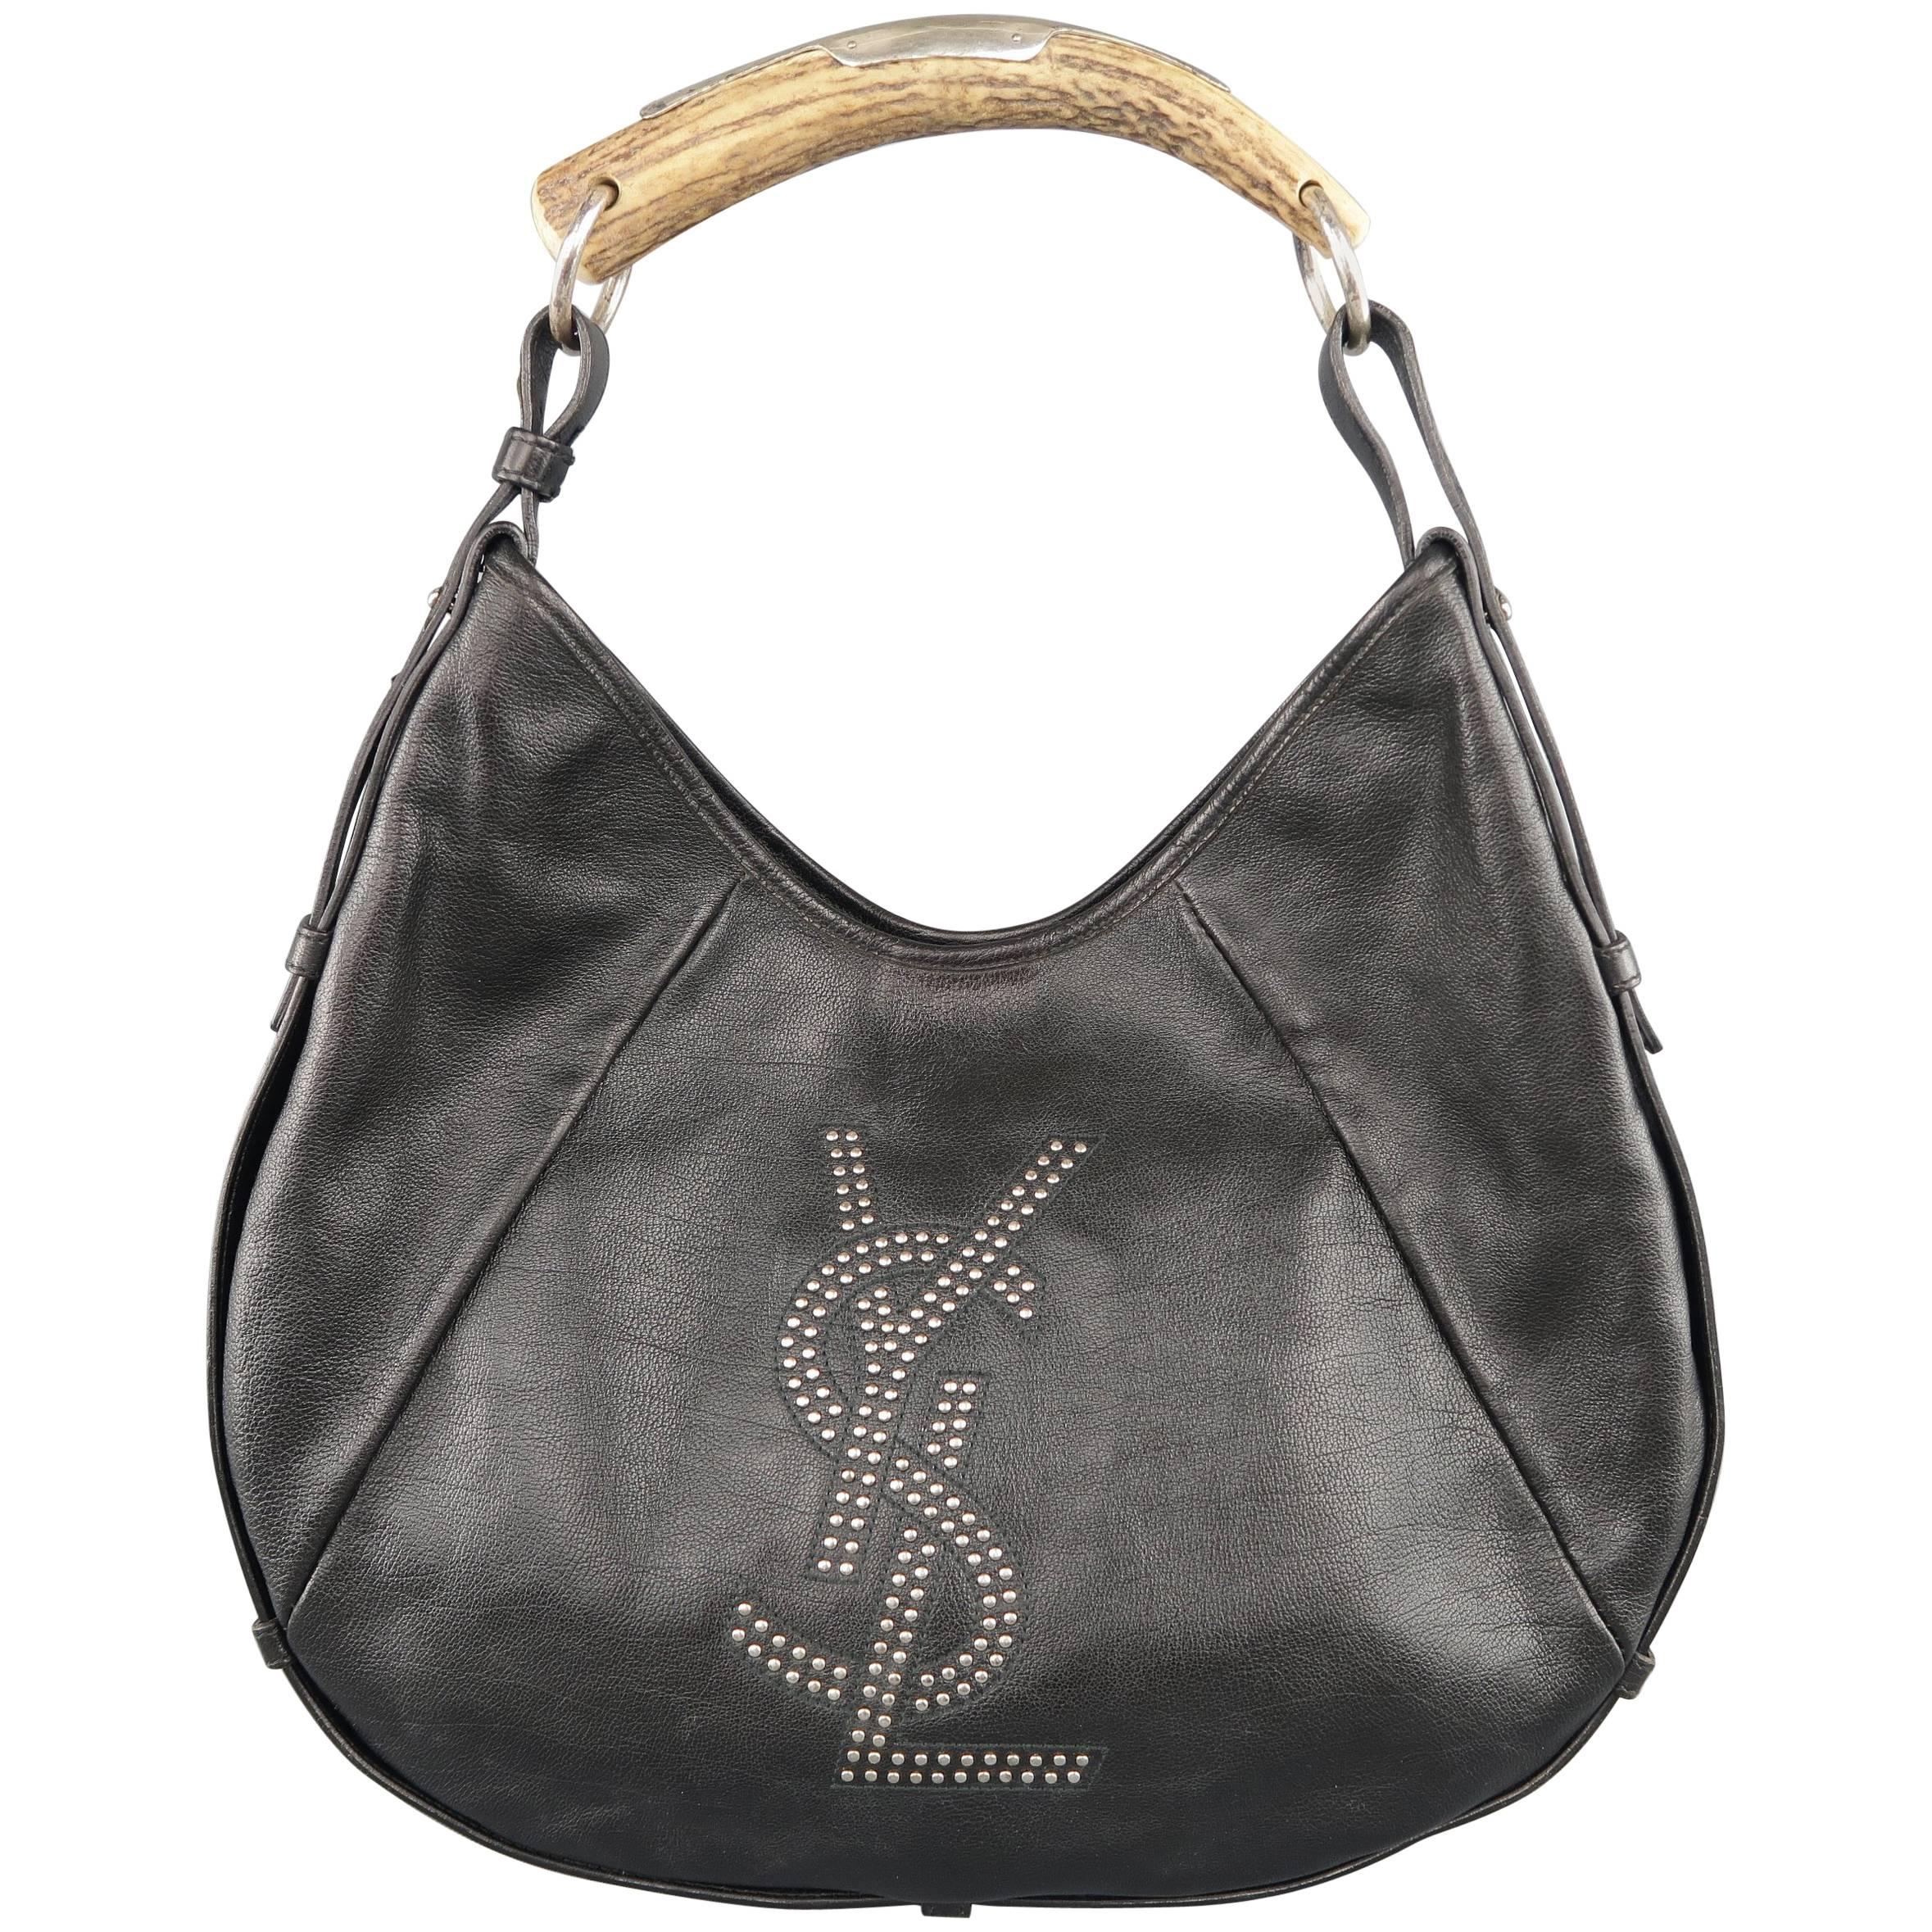 This Is the Best Time to Invest In YSL's Iconic Mombasa Bag